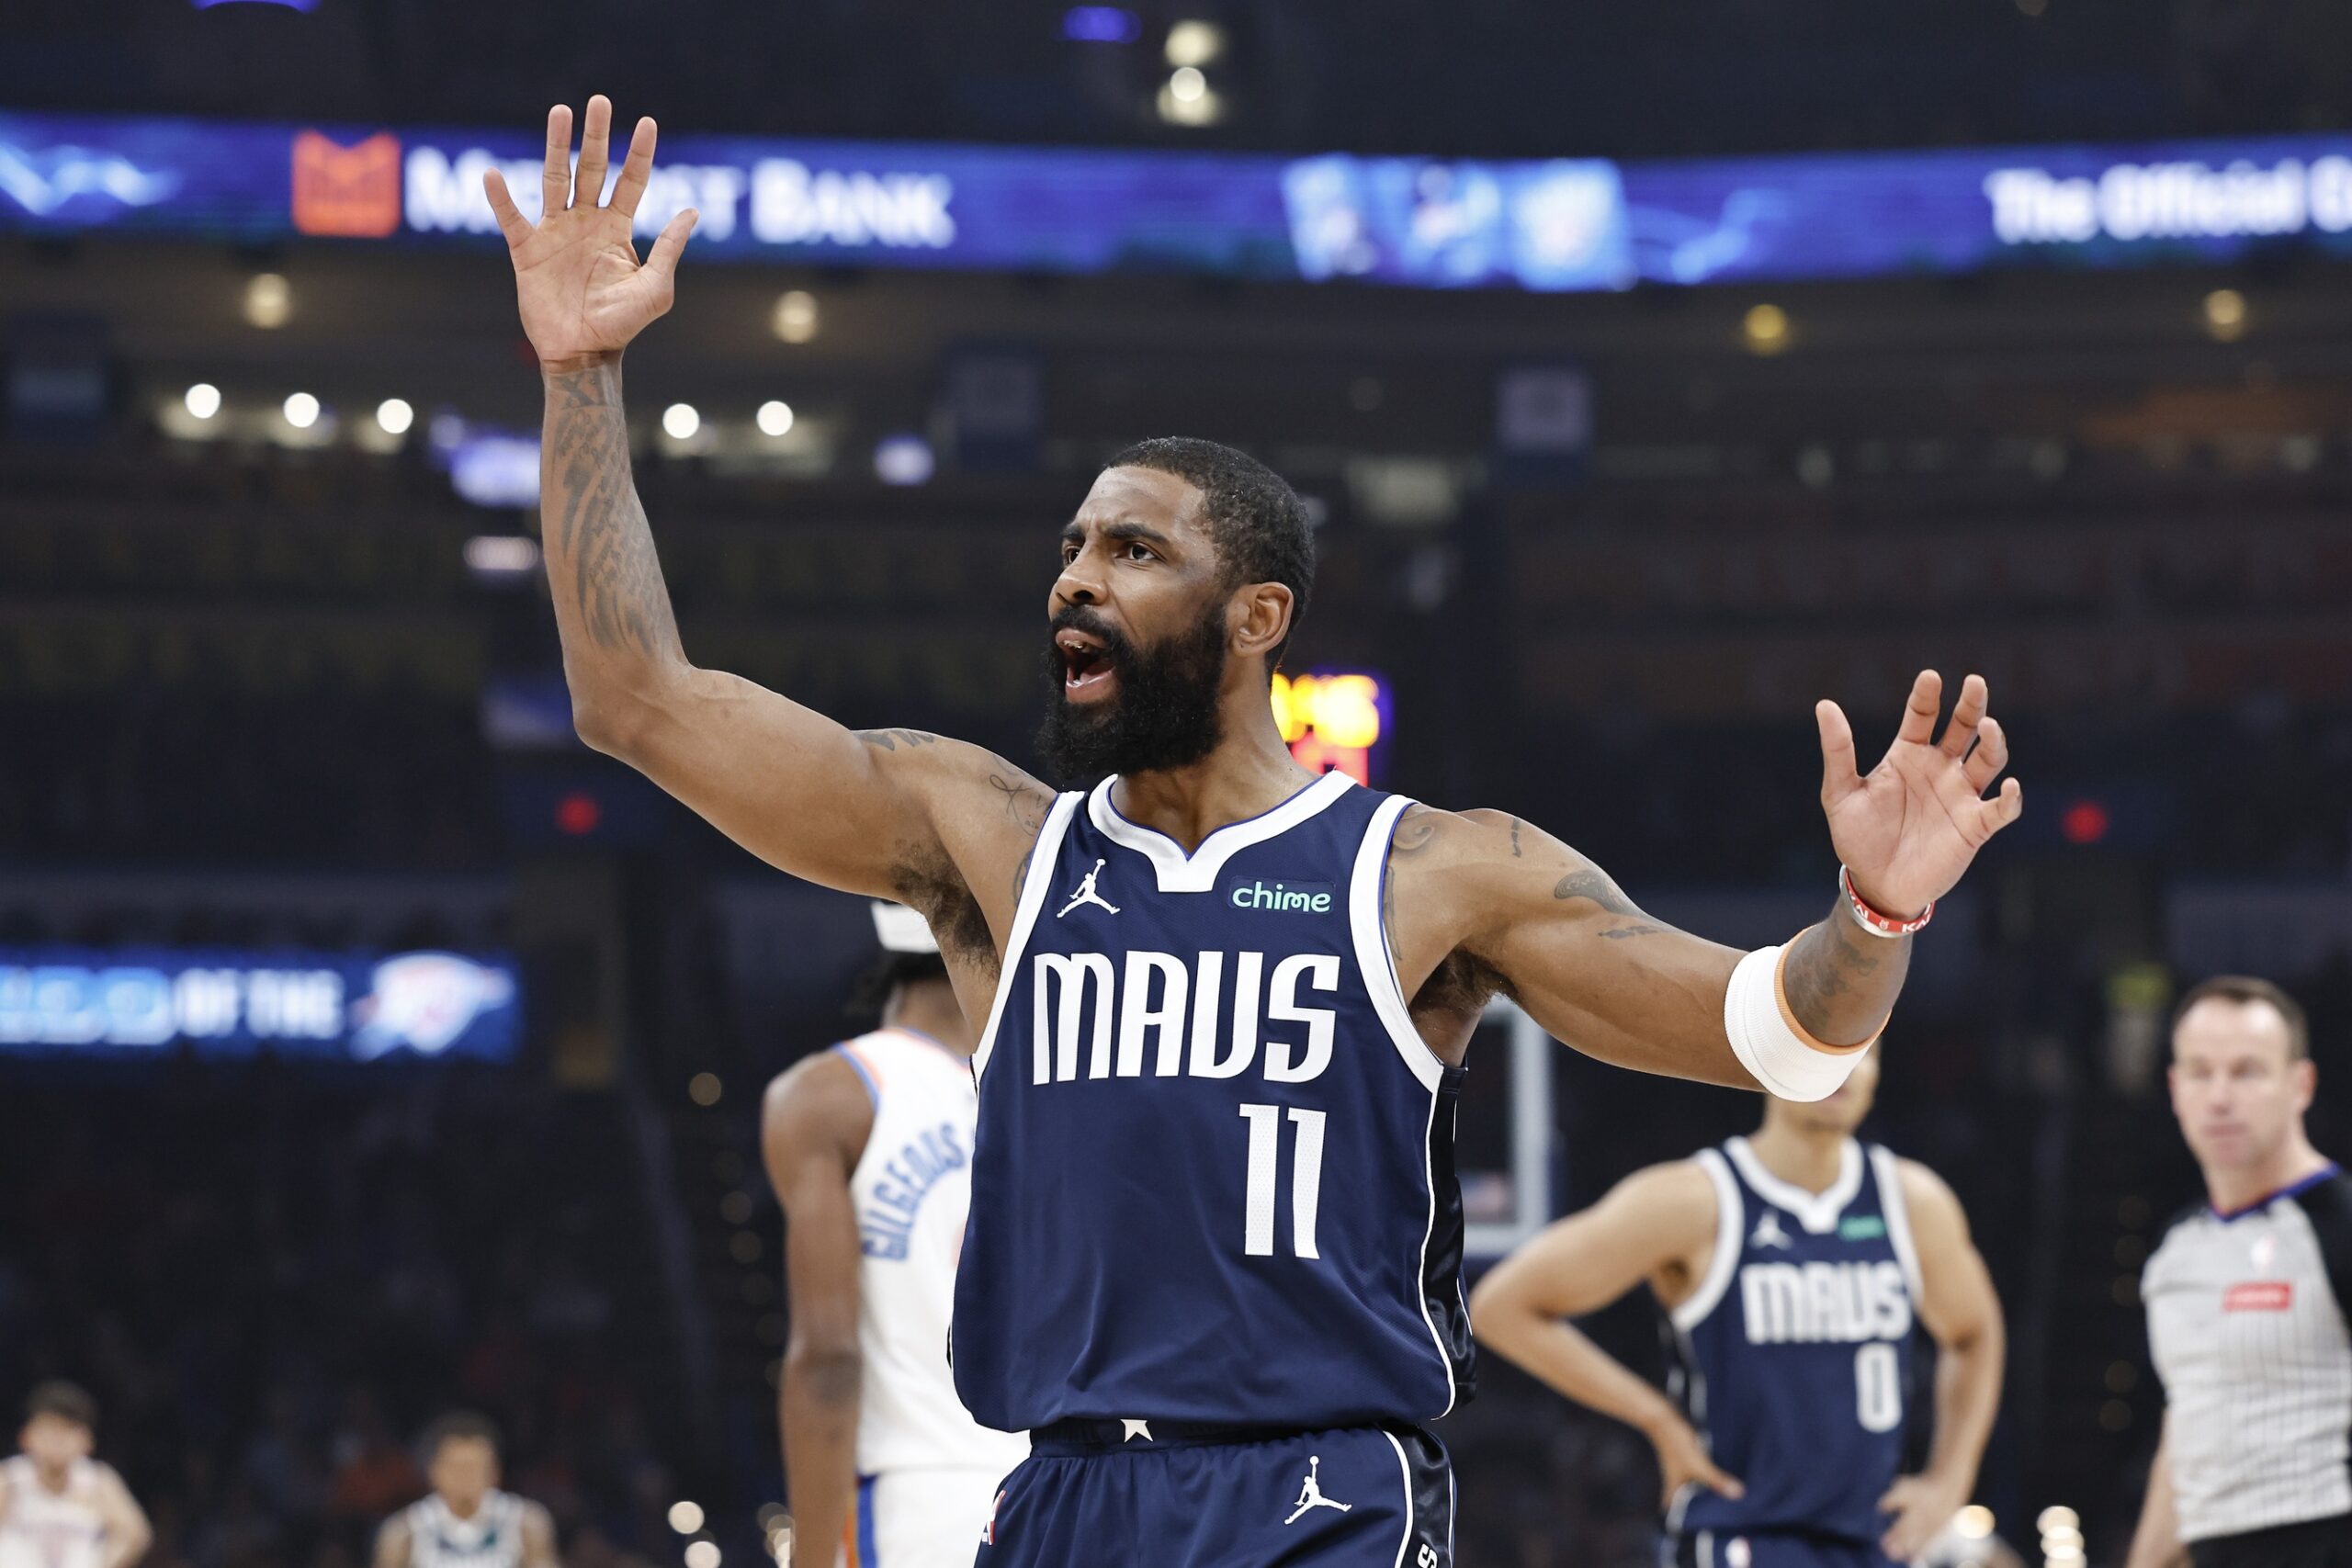 Dallas Mavericks guard Kyrie Irving (11) reacts after an officials call on a play against the Oklahoma City Thunder during the first quarter at Paycom Center.